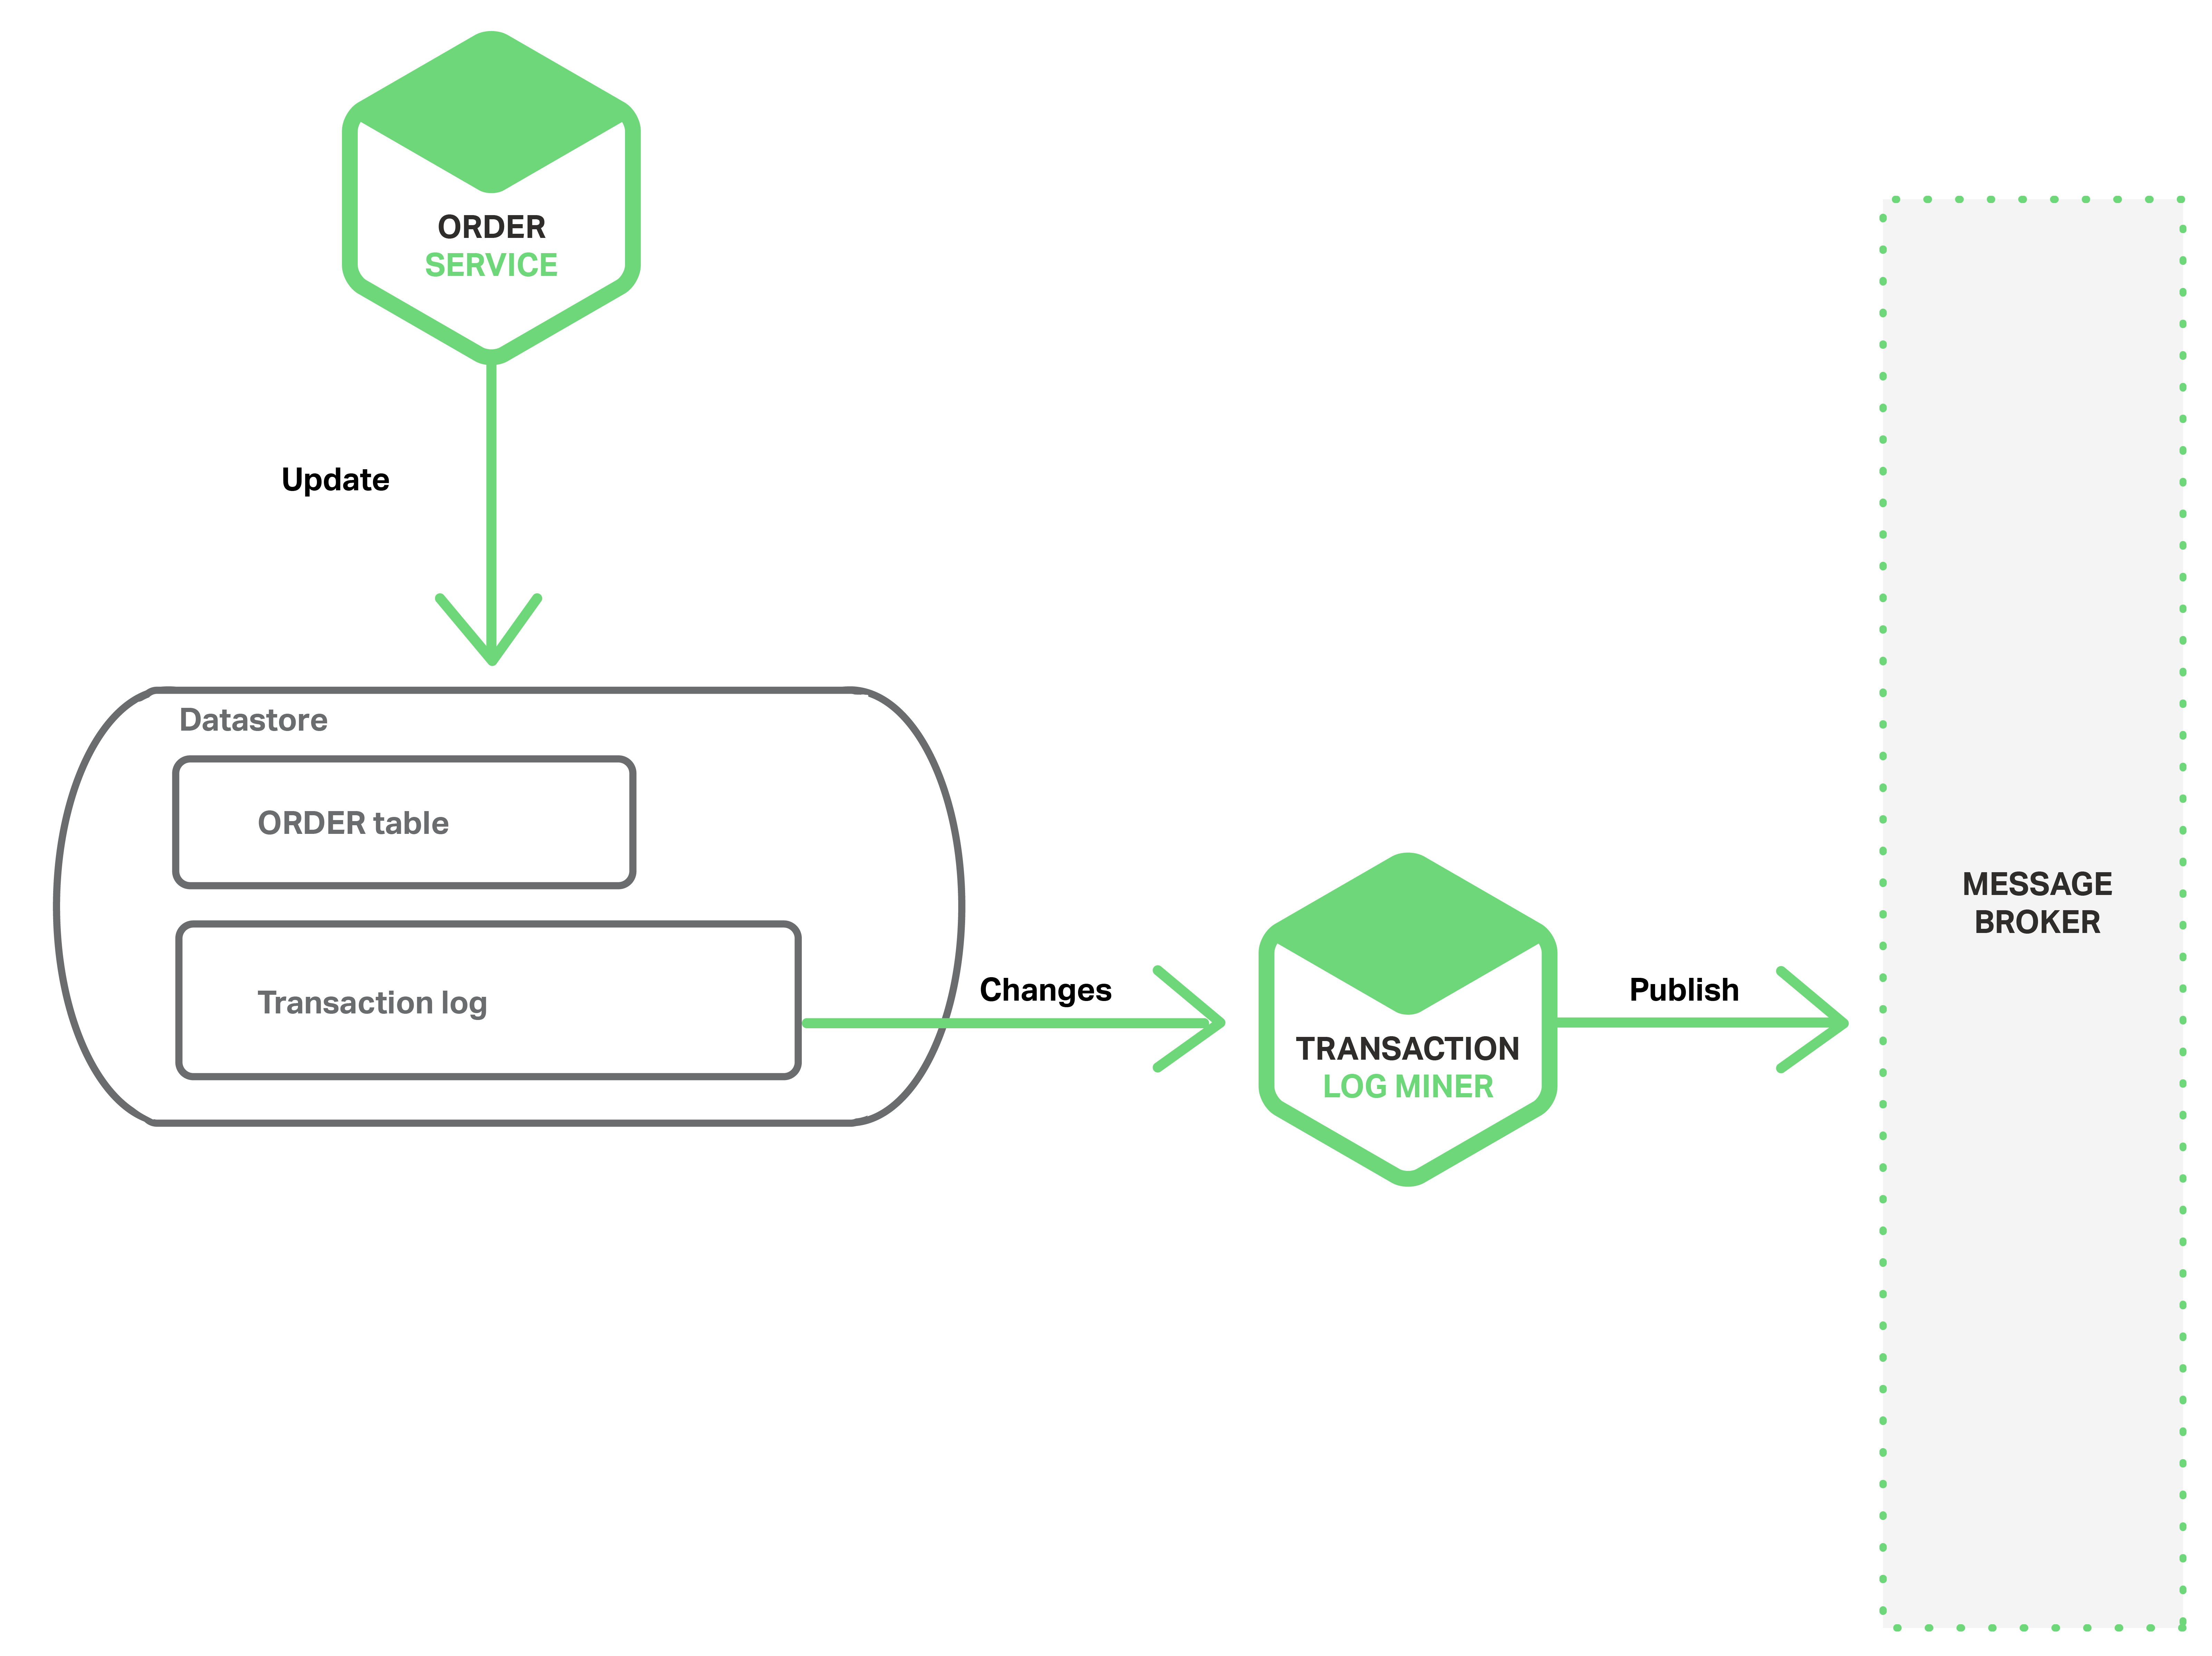 In a microservice architecture, achieve atomicity by mining the transaction log for events